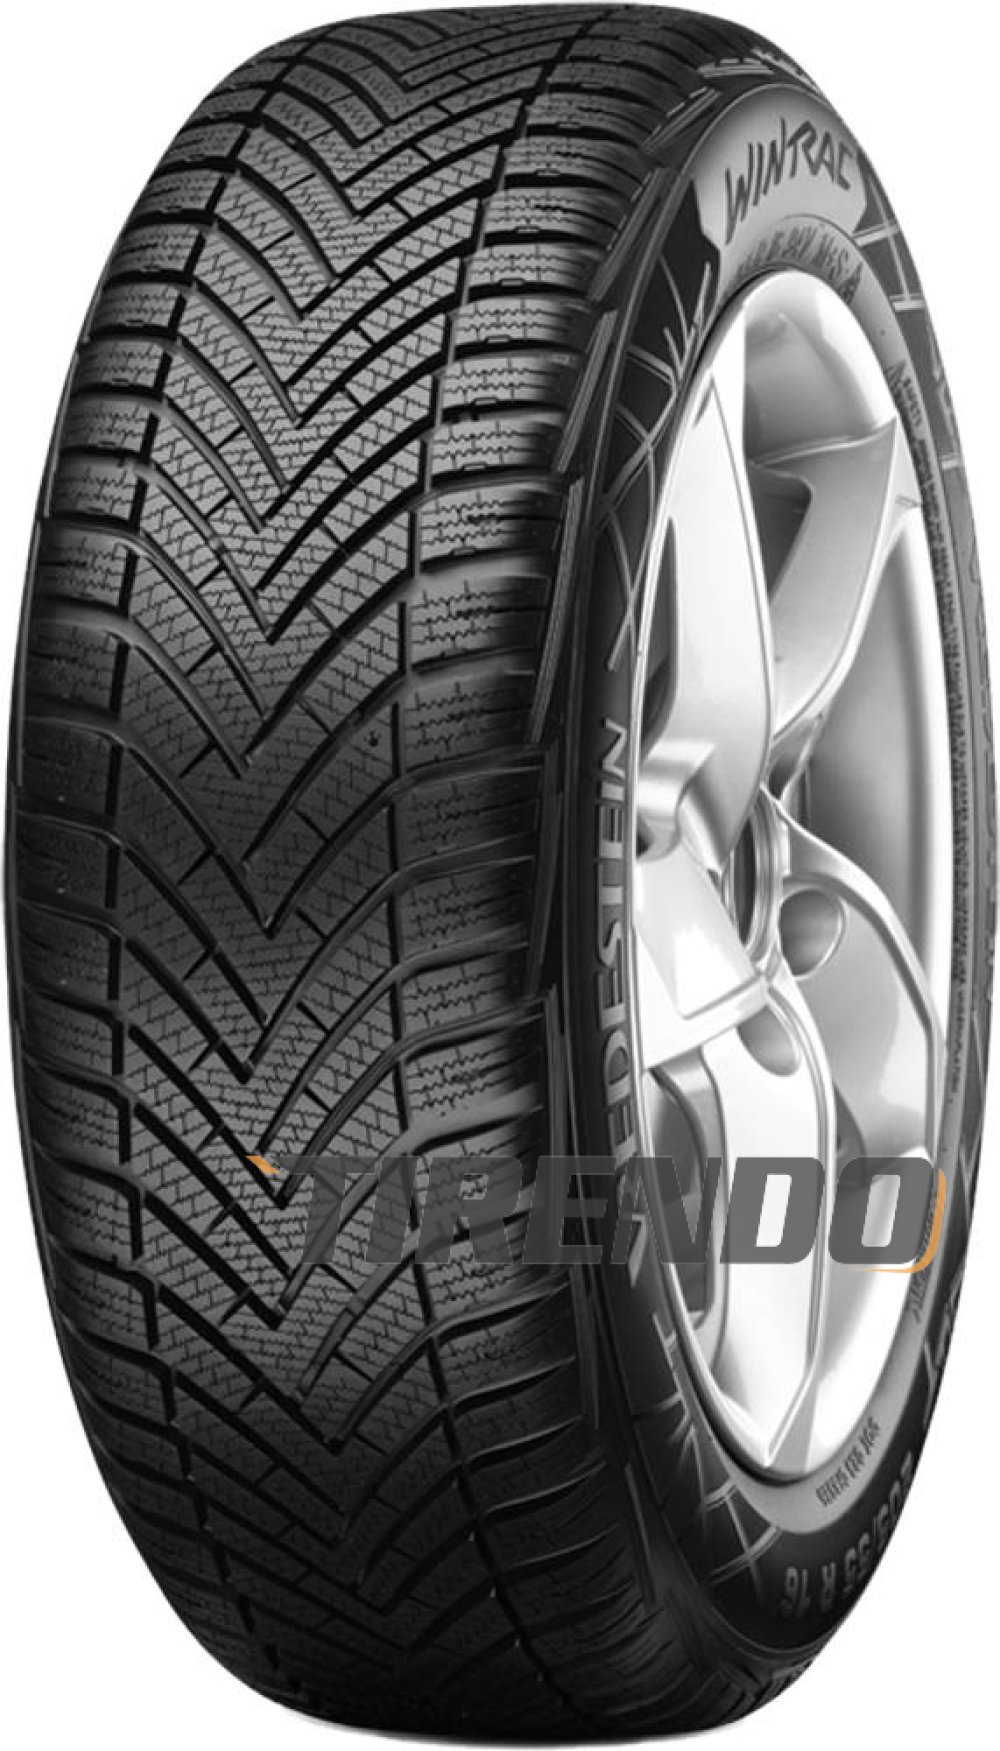 Image of Vredestein Wintrac ( 185/65 R15 92T XL )